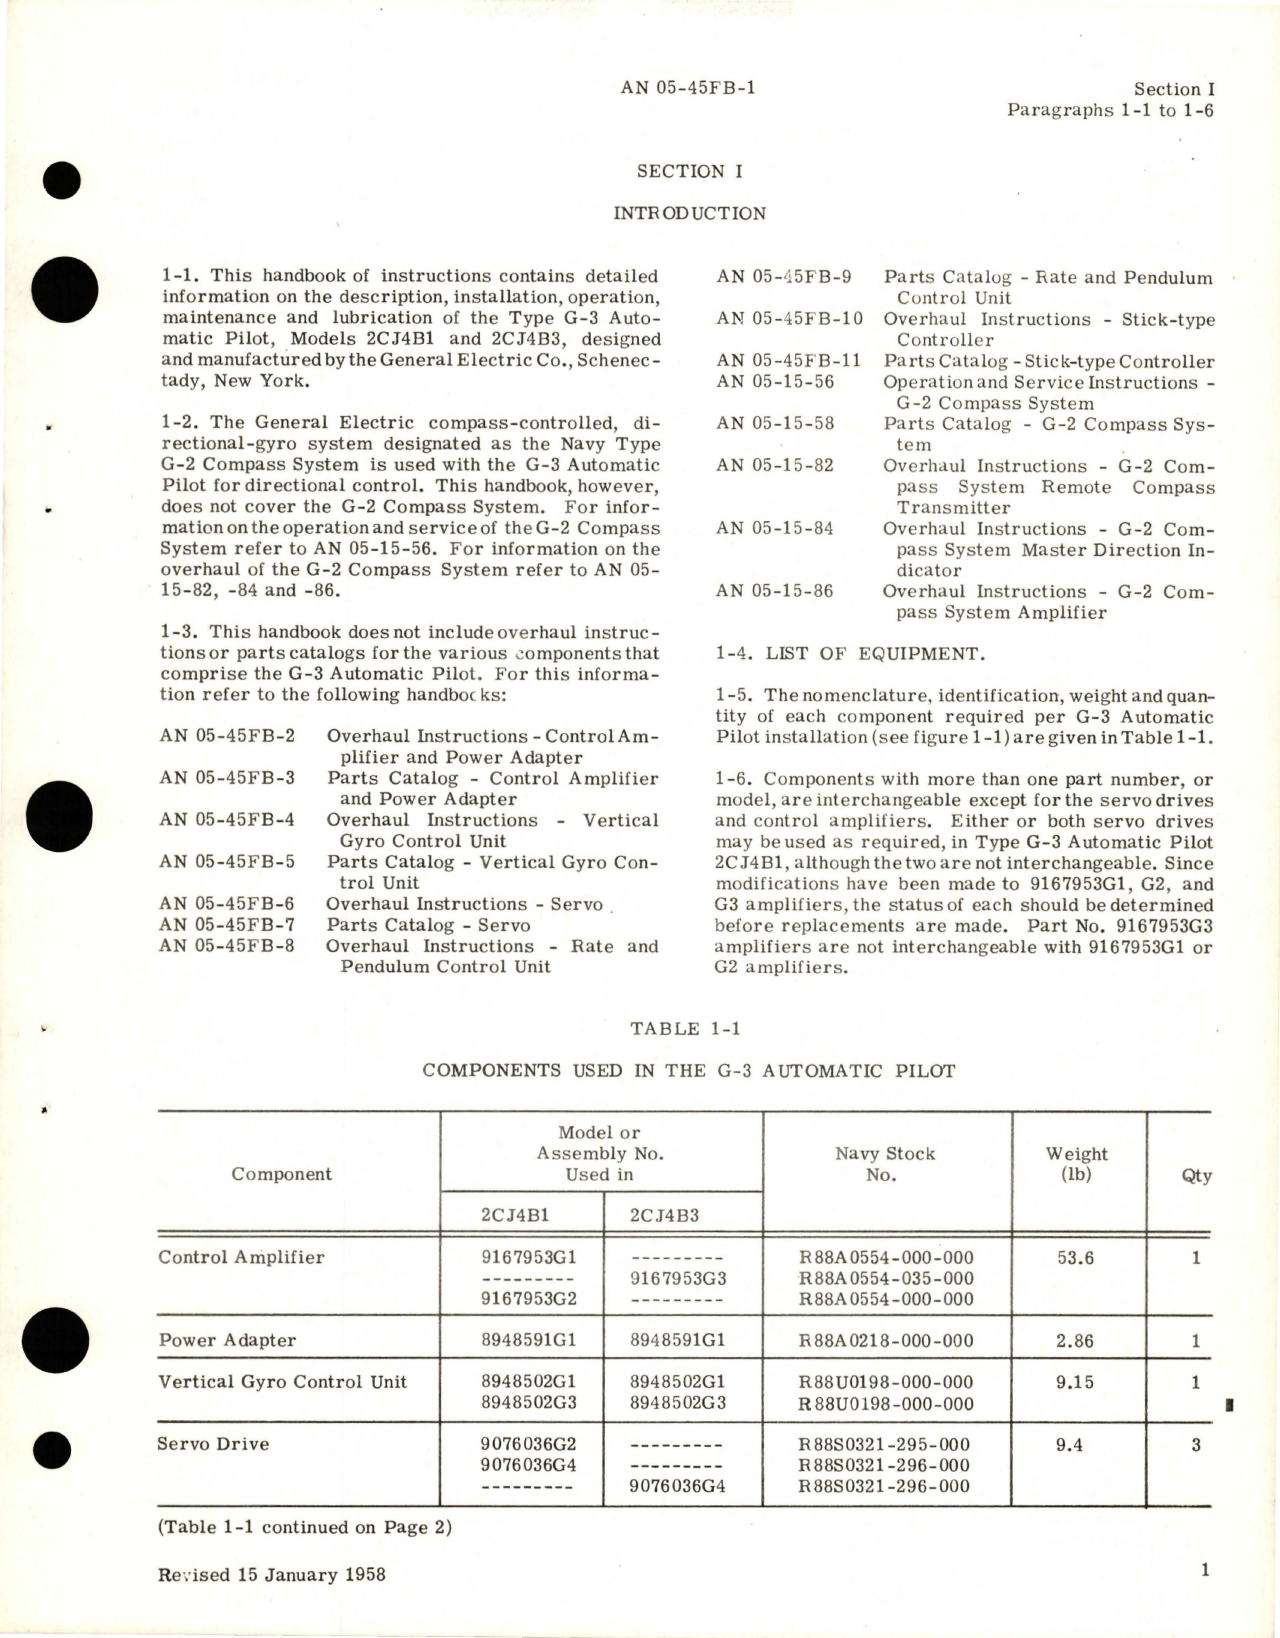 Sample page 5 from AirCorps Library document: Operation and Service Instructions for G-3 Automatic Pilot - Model 2CJ4B1 and 2CJ4B3